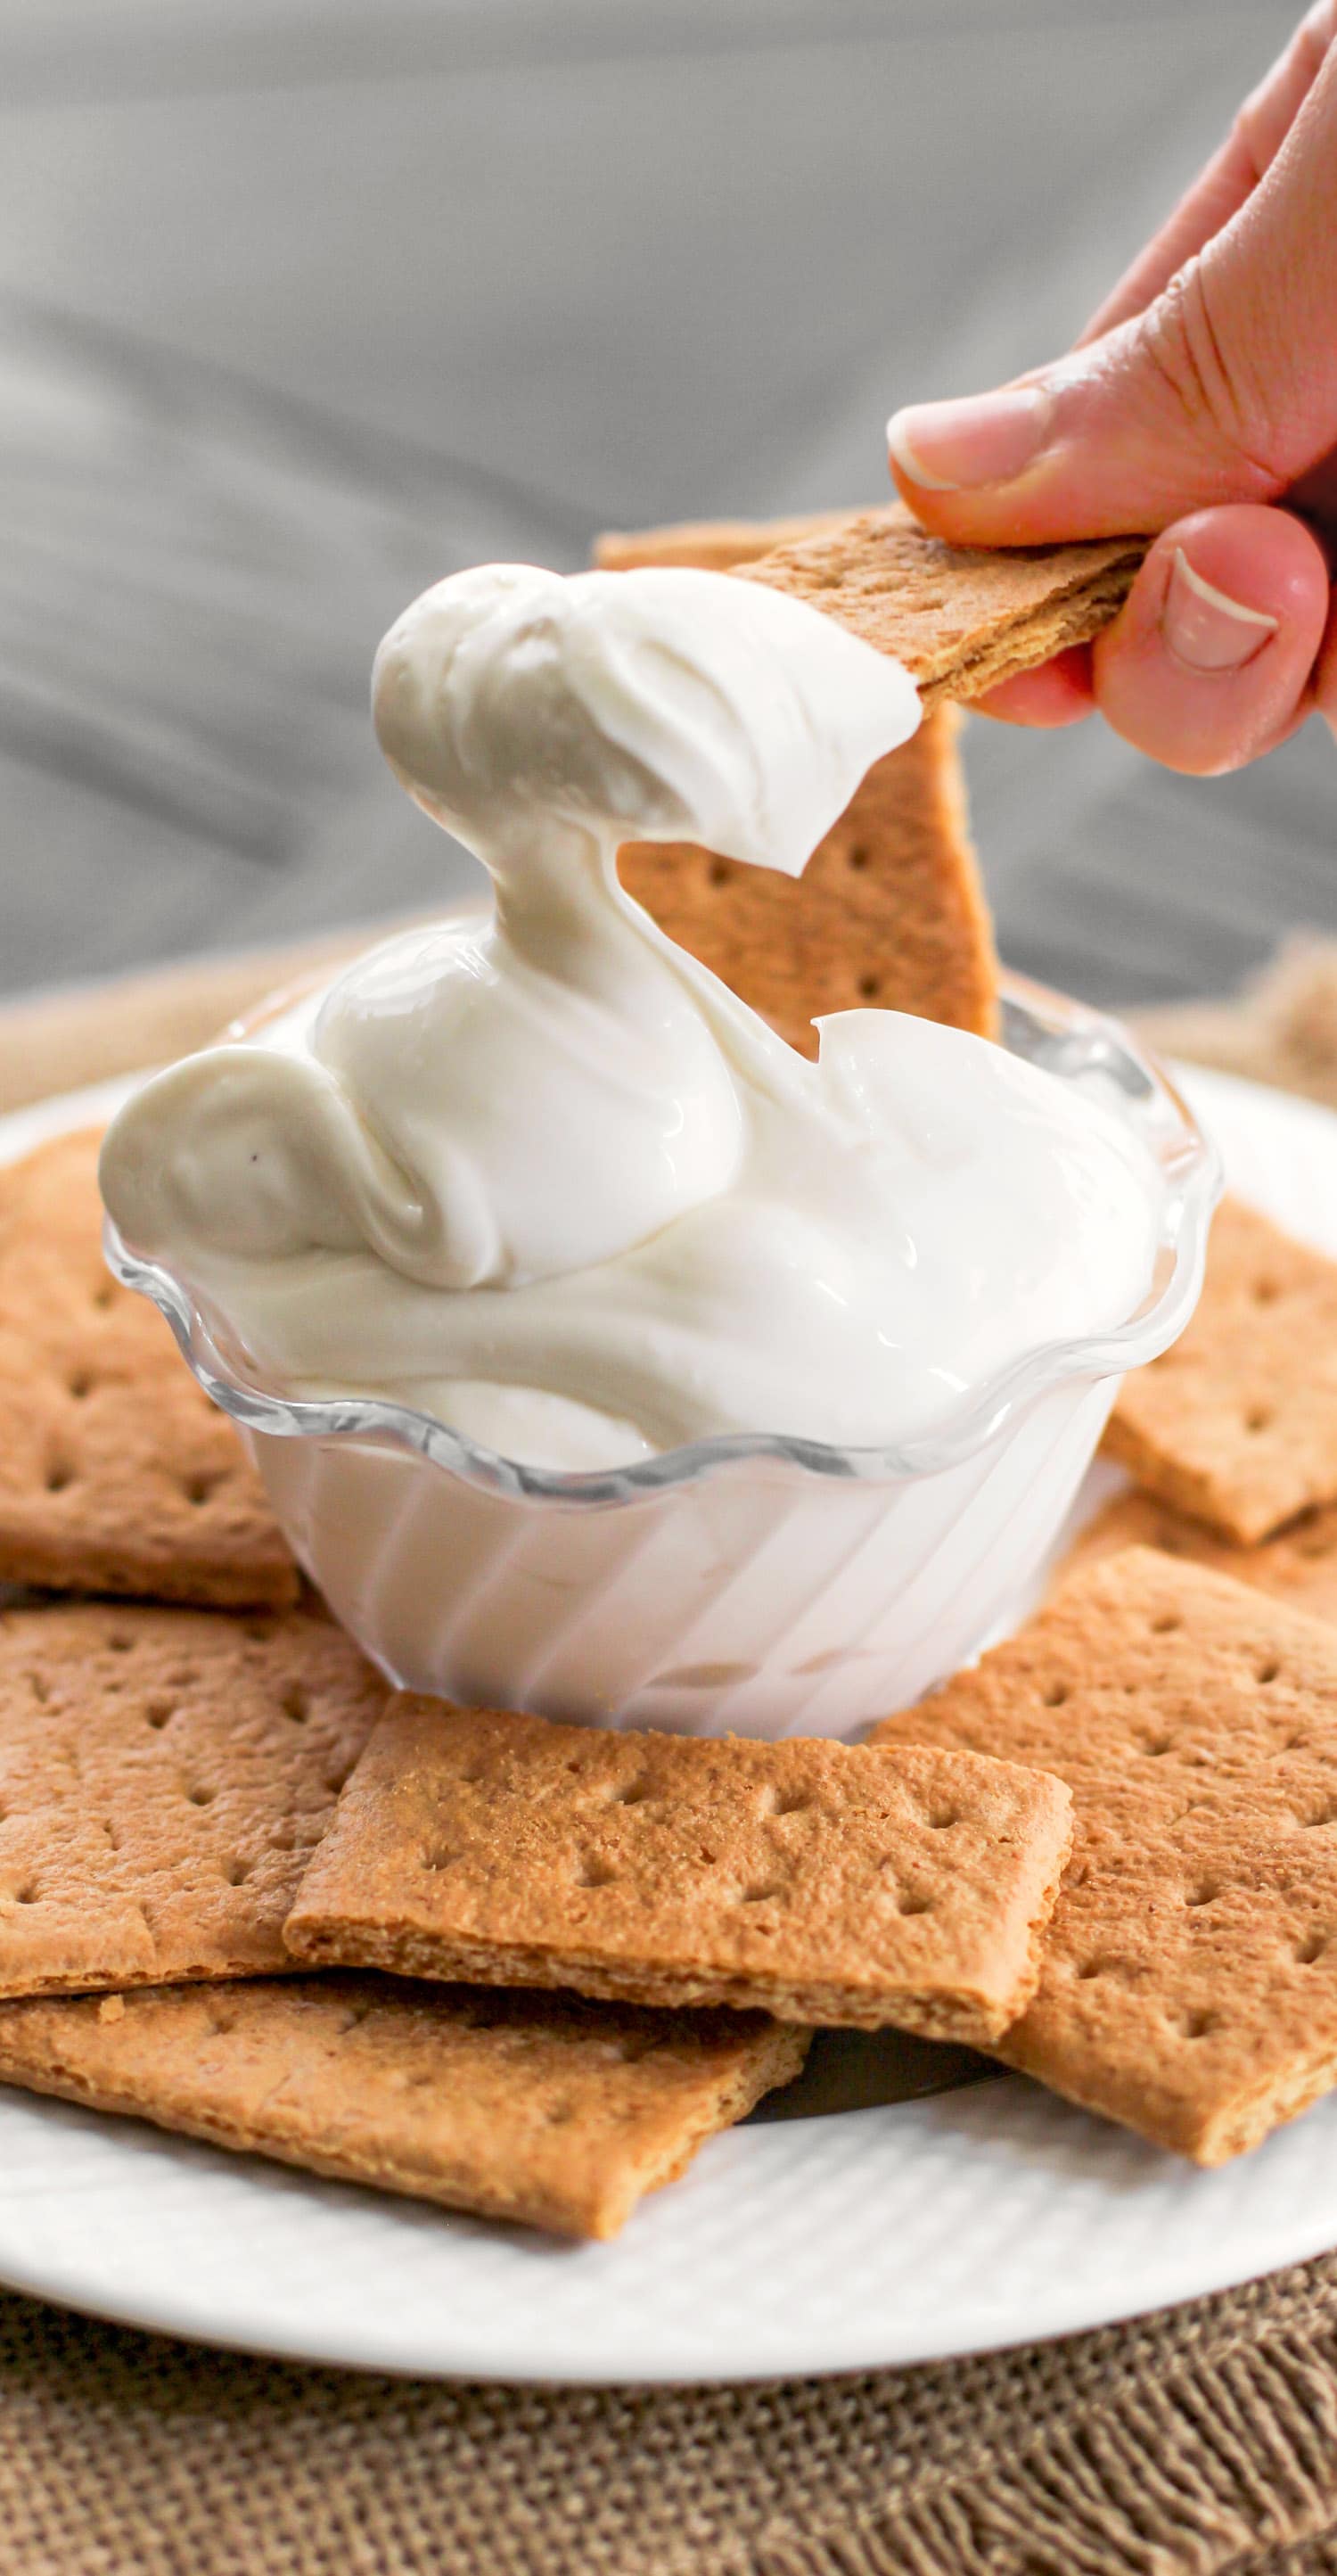 This 90-calorie Cheesecake Dip is ultra creamy, sweet, and satisfying. It tastes just like cheesecake batter, except it's sugar free, low fat, low carb, and high protein! All you need are 4 ingredients and a few minutes to make this secretly healthy, no-bake dessert dip! 